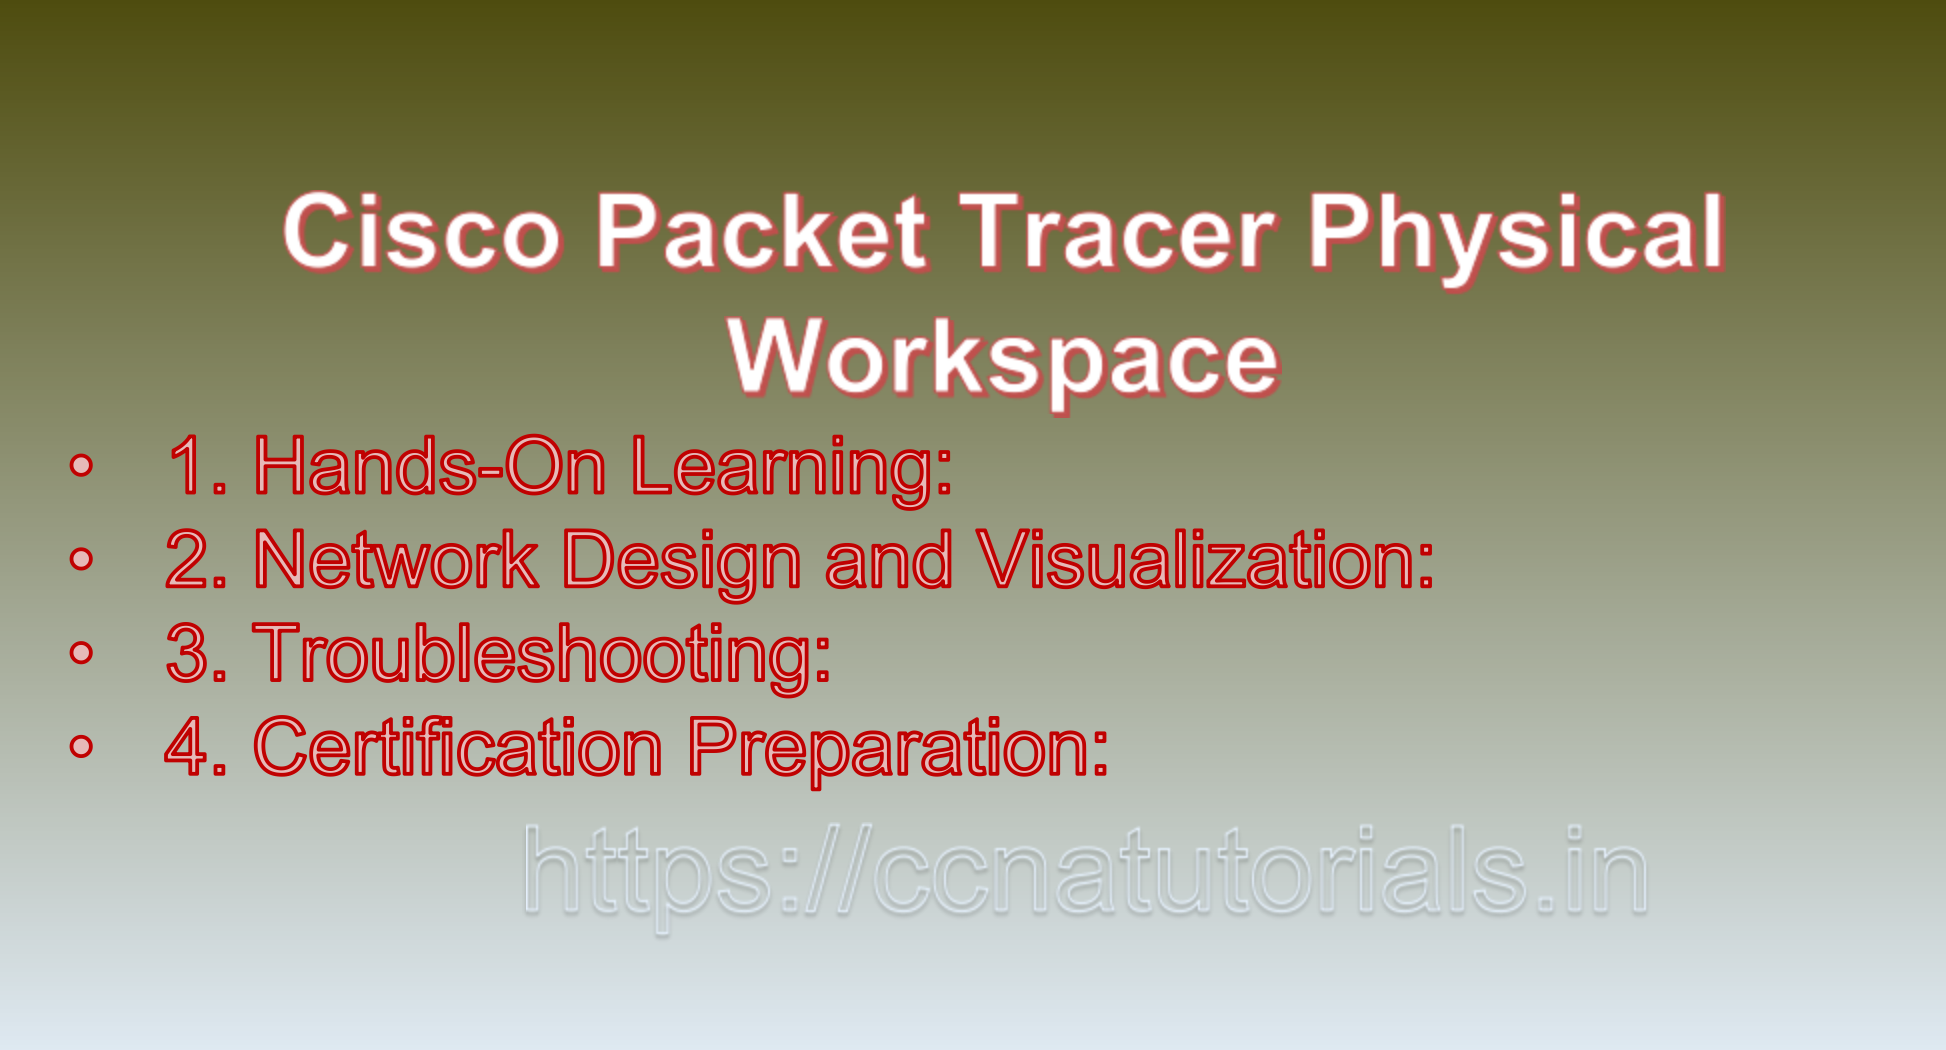 Cisco Packet Tracer Physical Workspace, ccna, ccna tutorials